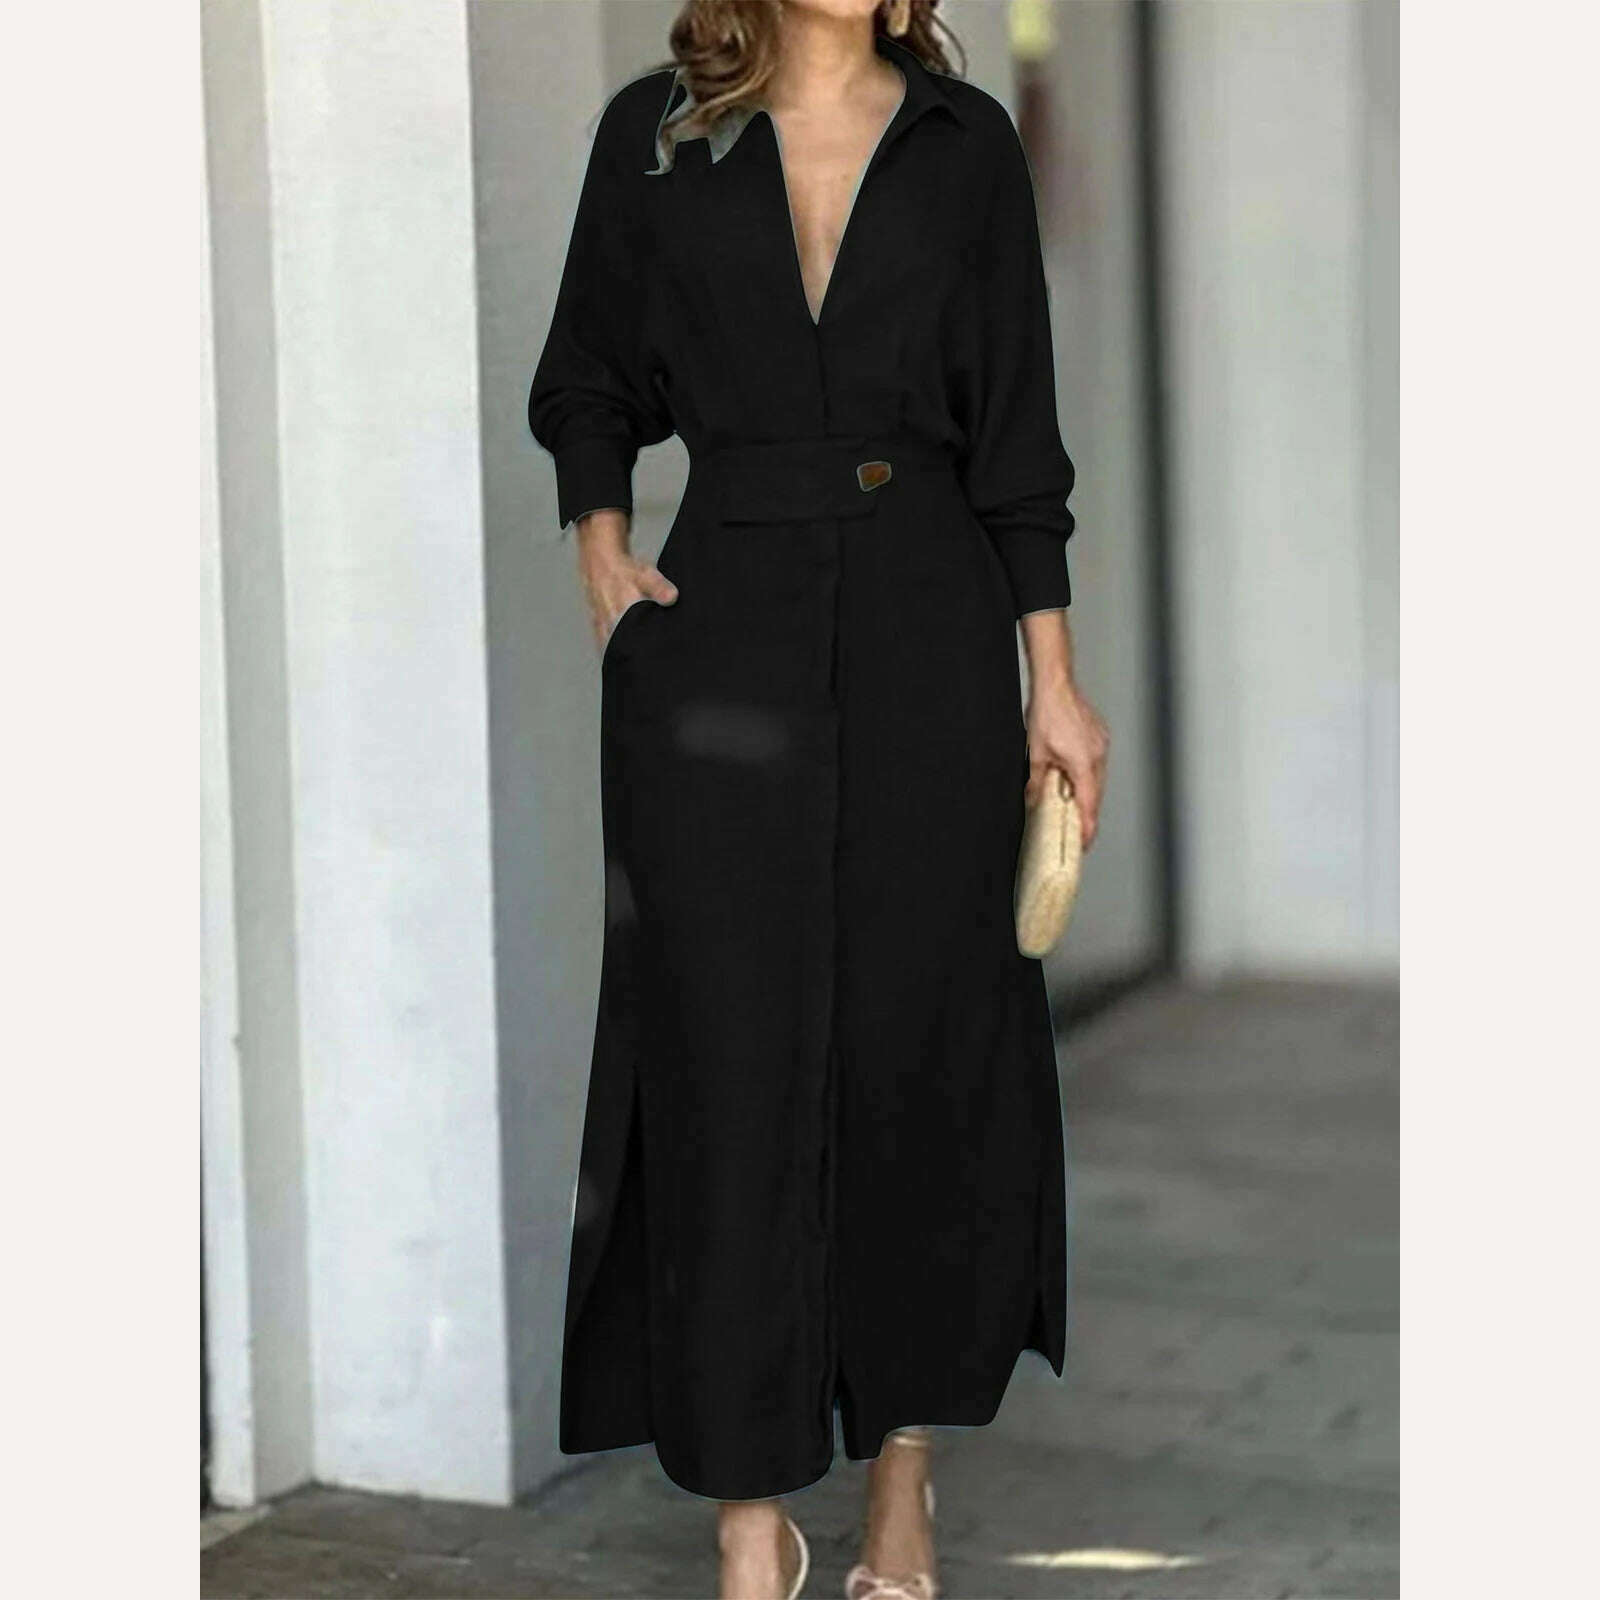 KIMLUD, Yeezzi Office Lady Fashion Long Sleeve Solid Color V-Neck A-Line Dress 2023 Spring Autumn Casual Going Out Vacation Maxi Dresses, BLACK / S, KIMLUD Women's Clothes